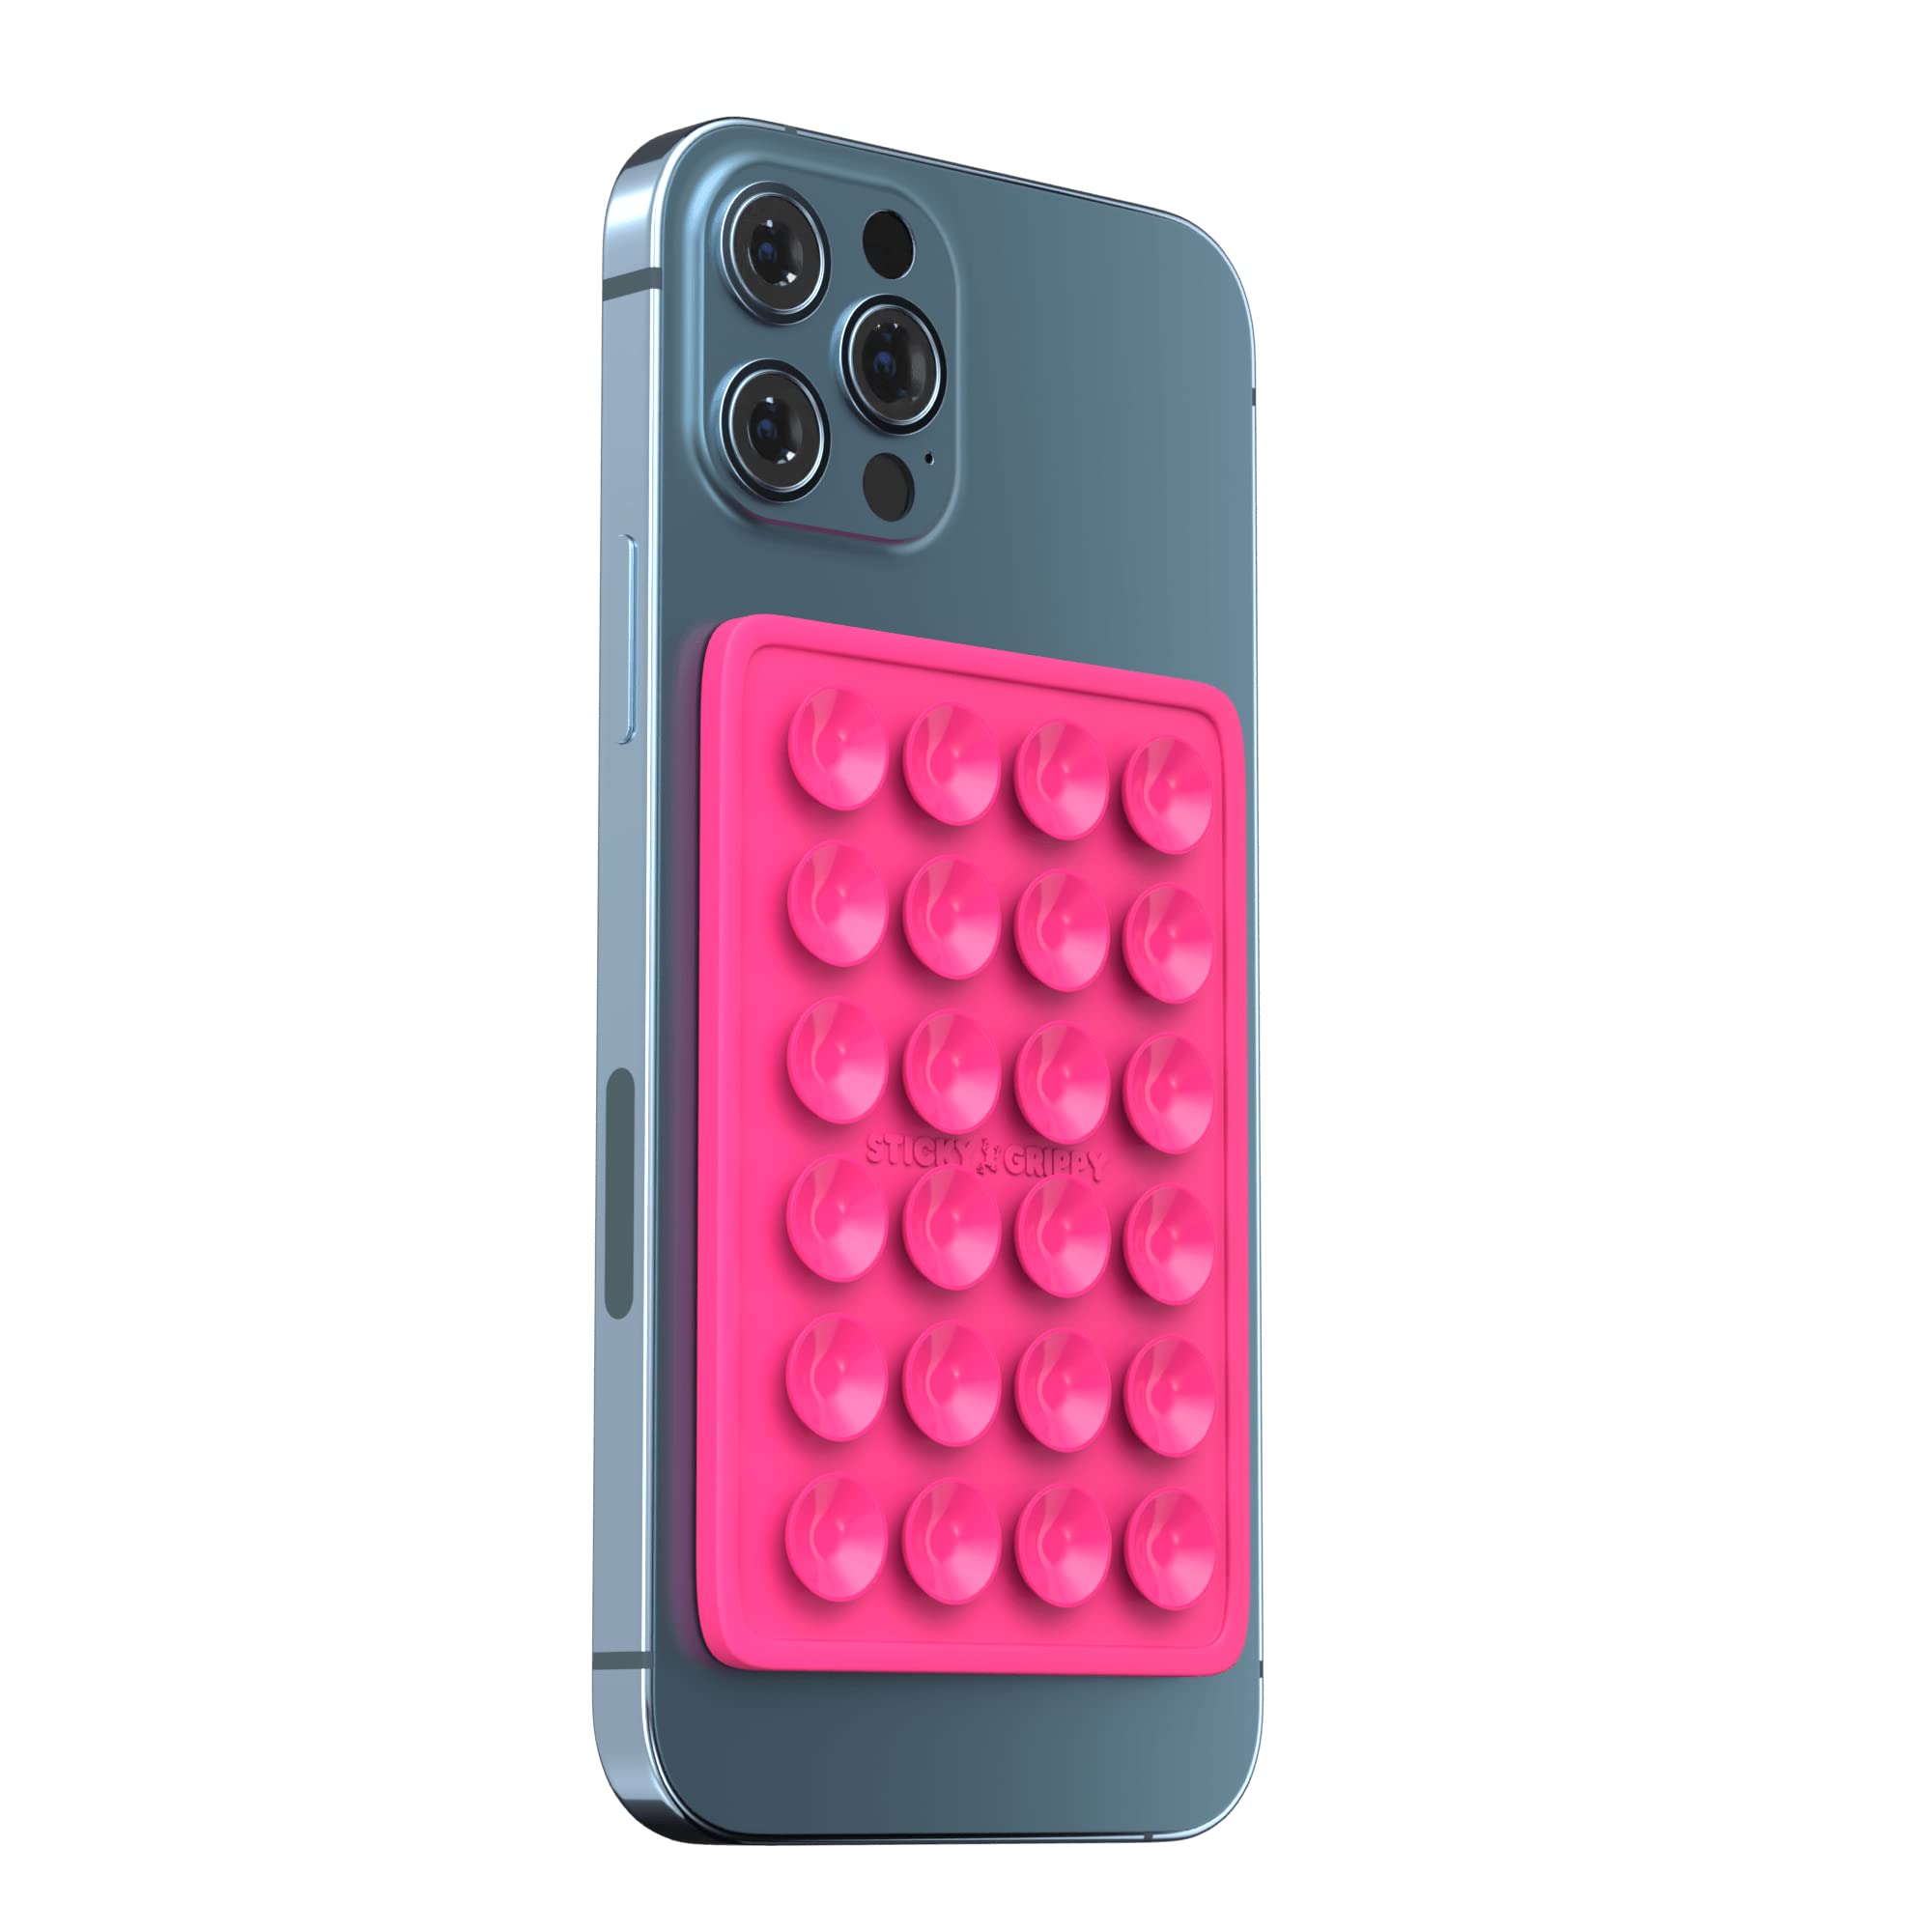 Teal casetify case with octobuddy - iPhone 13 Pro